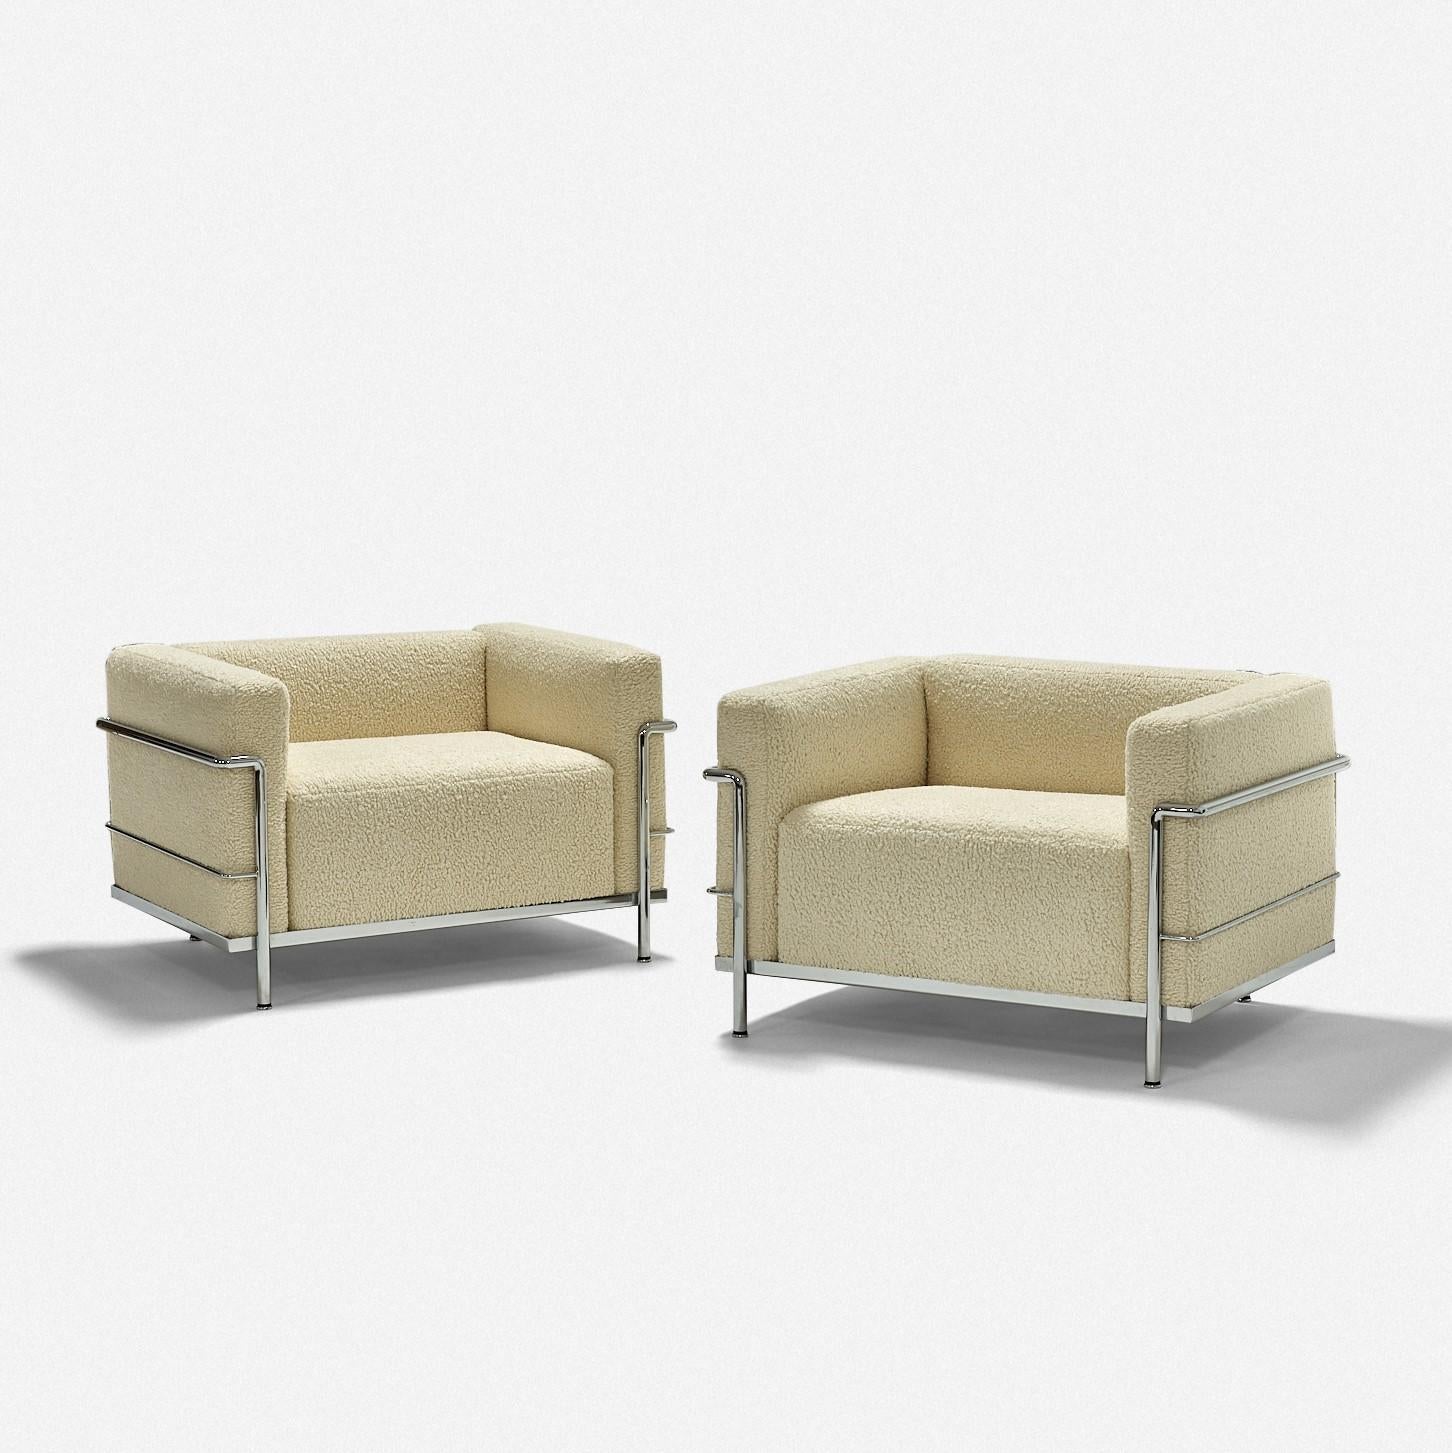 Charlotte Perriand, Pierre Jeanneret and Le Corbusier

LC3 lounge pair of chairs

Cassina
France 1928 / Italy c. 1990s
fabric, chrome-plate steel
Measures: 39 W × 30 D × 24 H inches

Singed pair of LC3 lounge chairs by Cassina with new